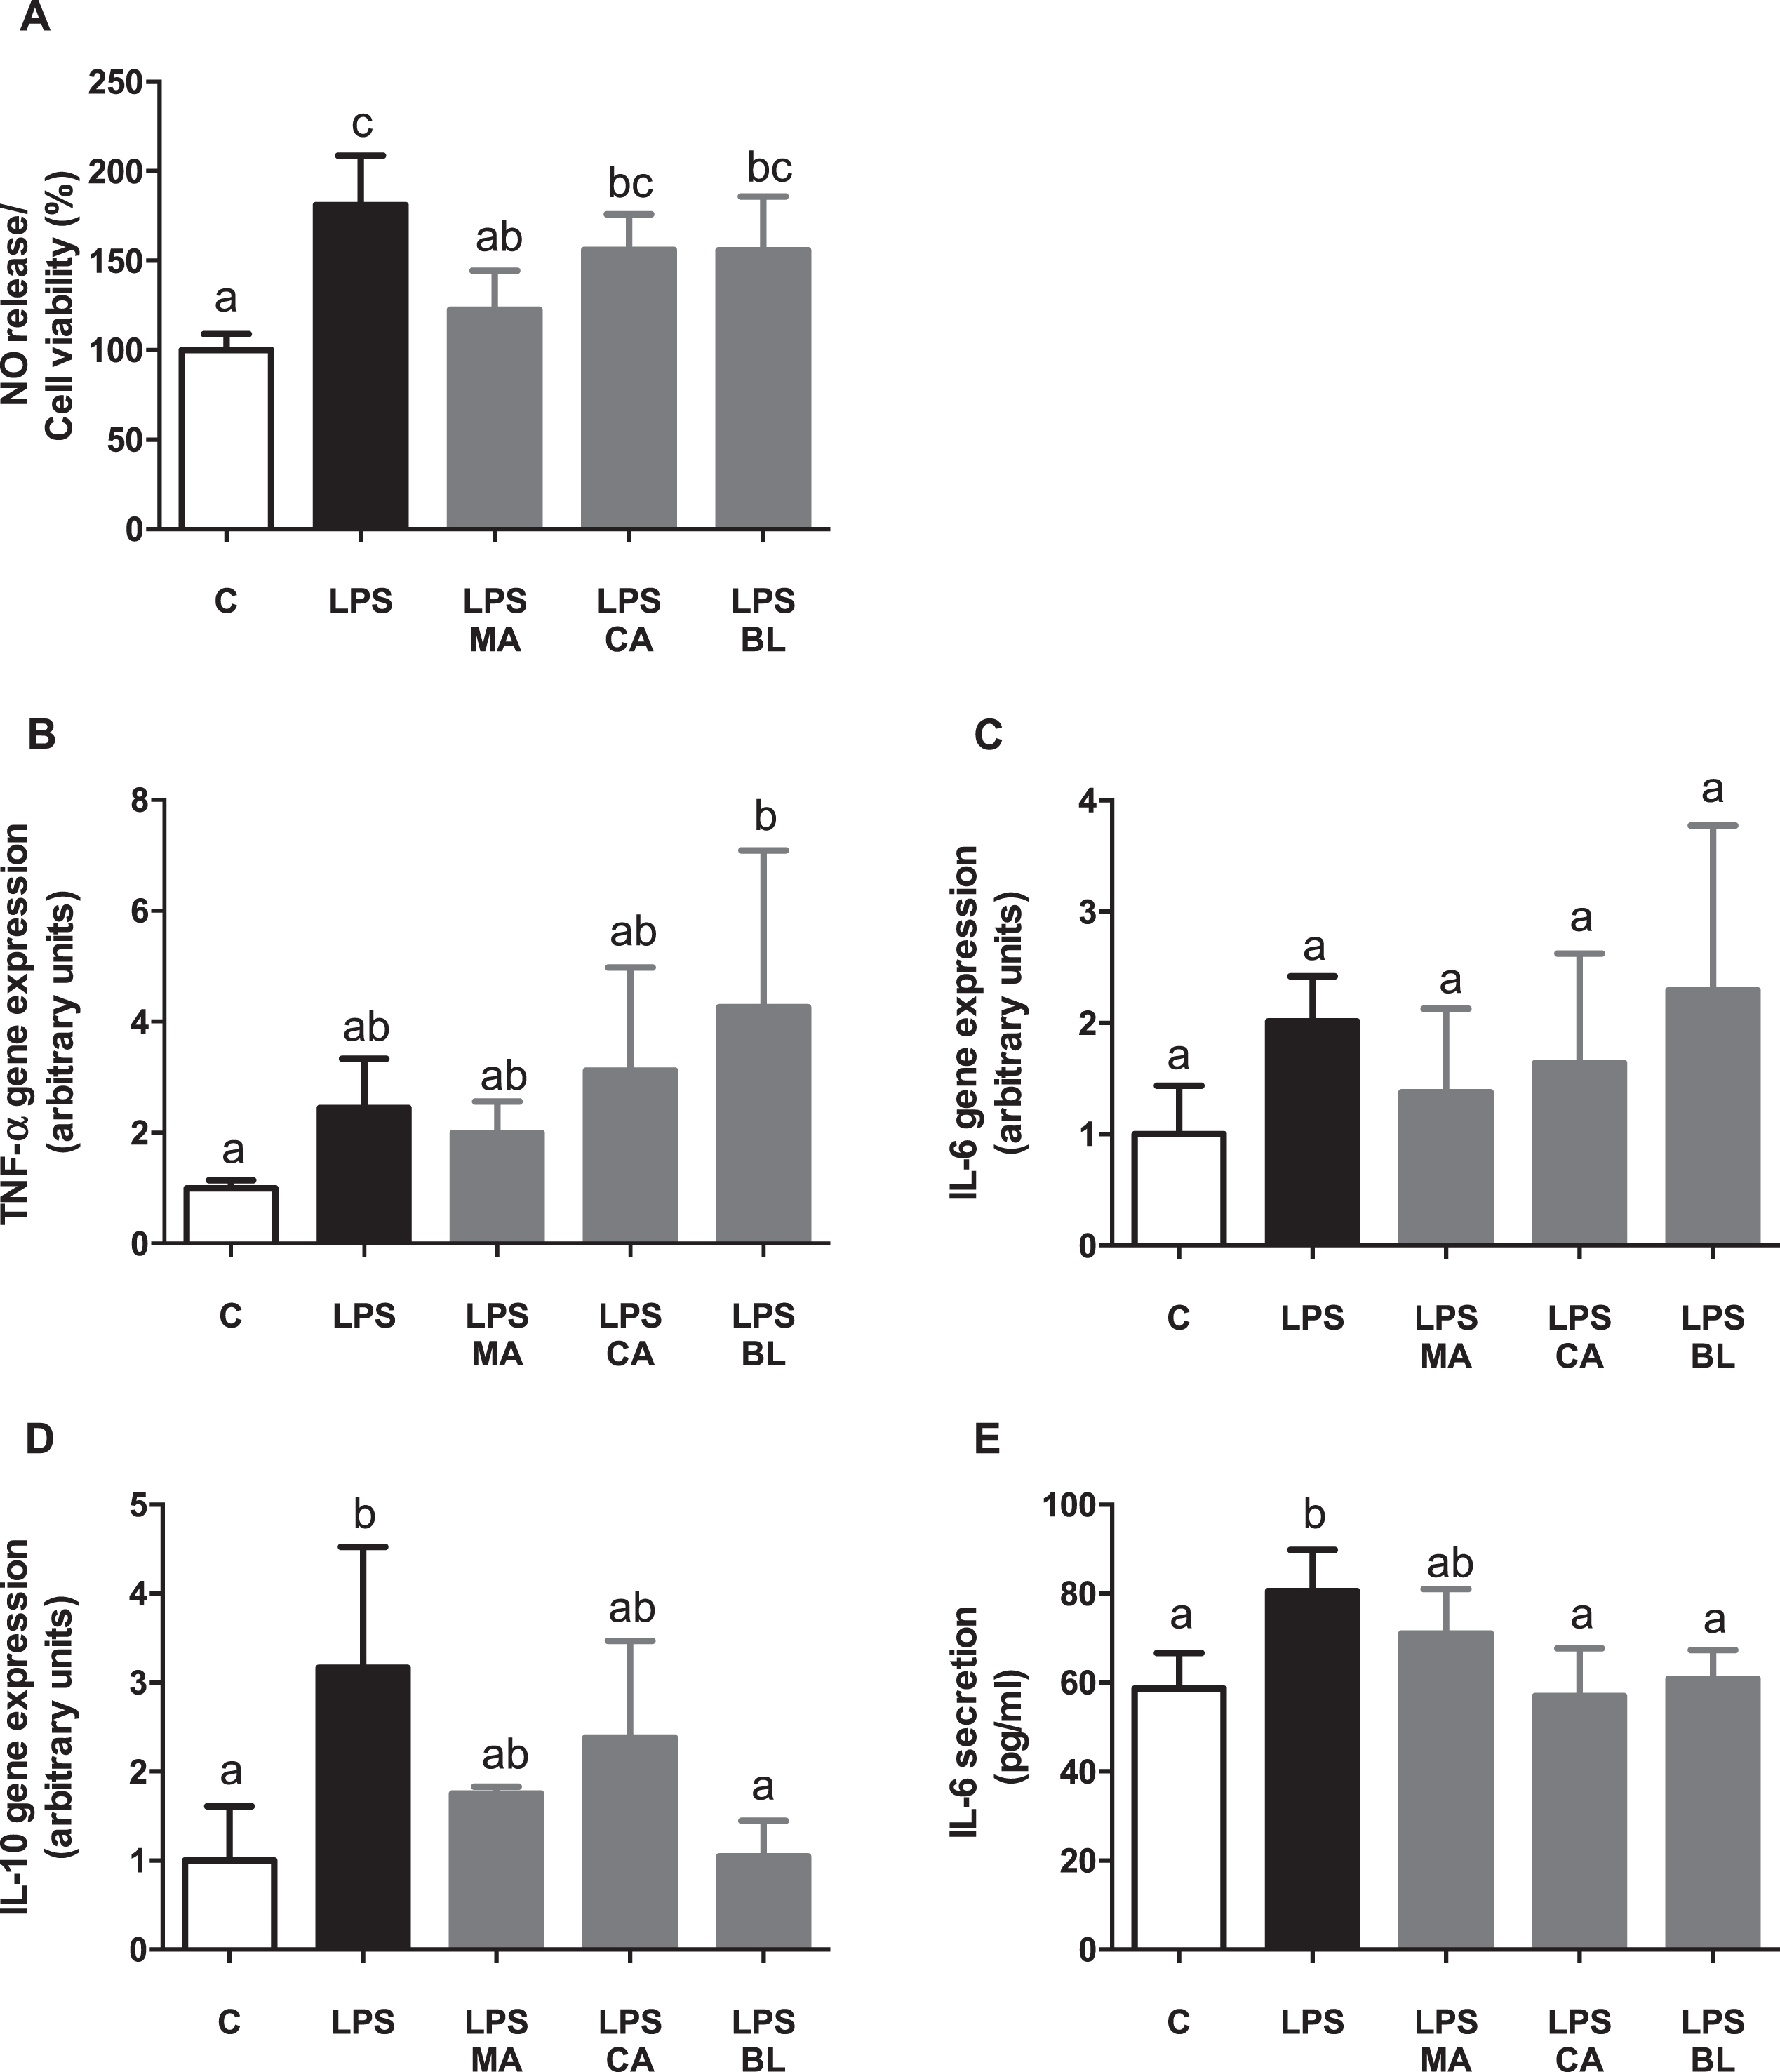 Anti-inflammatory effects of berries extract on in vitro LPS-activated human macrophages. THP-1 monocyte human cells were differentiated and then pre-treated with 100 μM total polyphenols of each extract for 2 hours. Finally, they were treated with 5 μg/mL LPS for 48 hours. Cells and culture media were saved for further determinations. (A) Nitric oxide (NO) release, (B) TNF-α gene expression, (C) IL-6 gene expression, (D) IL-10 gene expression, and (E) IL-6 release, were assayed. Data (n = 5–6) were expressed as mean±SD and analyzed with one-way ANOVA followed by Tukey posthoc tests. NO, nitric oxide; C, control; LPS, lipopolysaccharide; MA, Maqui; CA, Calafate; BL, Blueberry. Different letters showed a statistical significance of at least p < 0.05.